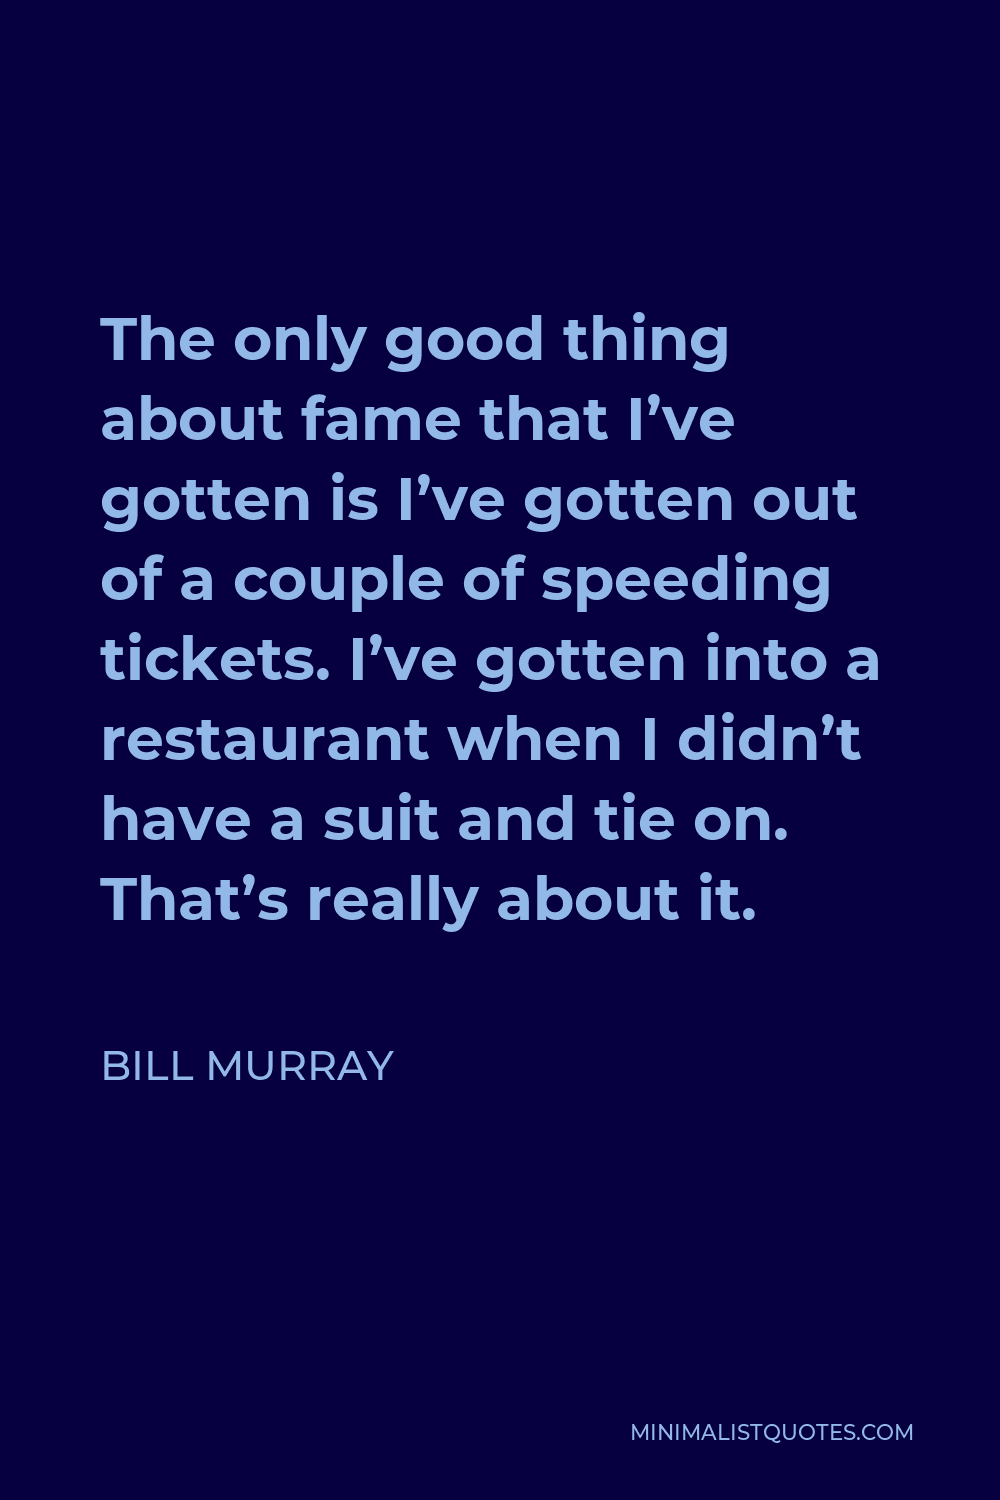 Bill Murray Quote - The only good thing about fame that I’ve gotten is I’ve gotten out of a couple of speeding tickets. I’ve gotten into a restaurant when I didn’t have a suit and tie on. That’s really about it.